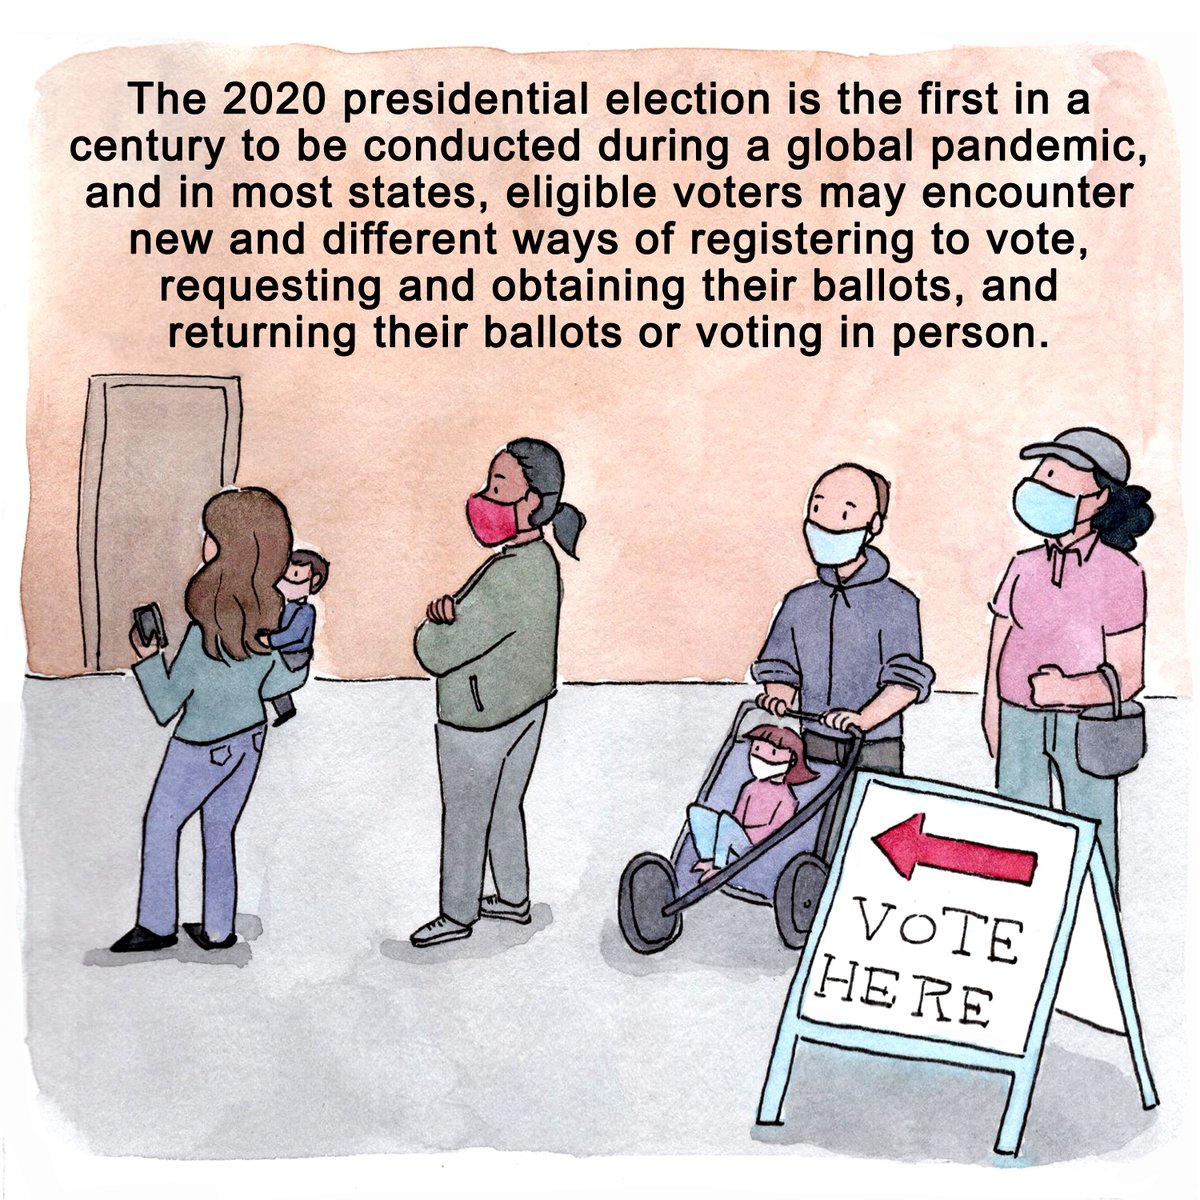 The 2020 presidential election is the first in a century to be conducted during a global pandemic. It creates... complications! (Full text in the image--too long for Twitter ) (2/10)